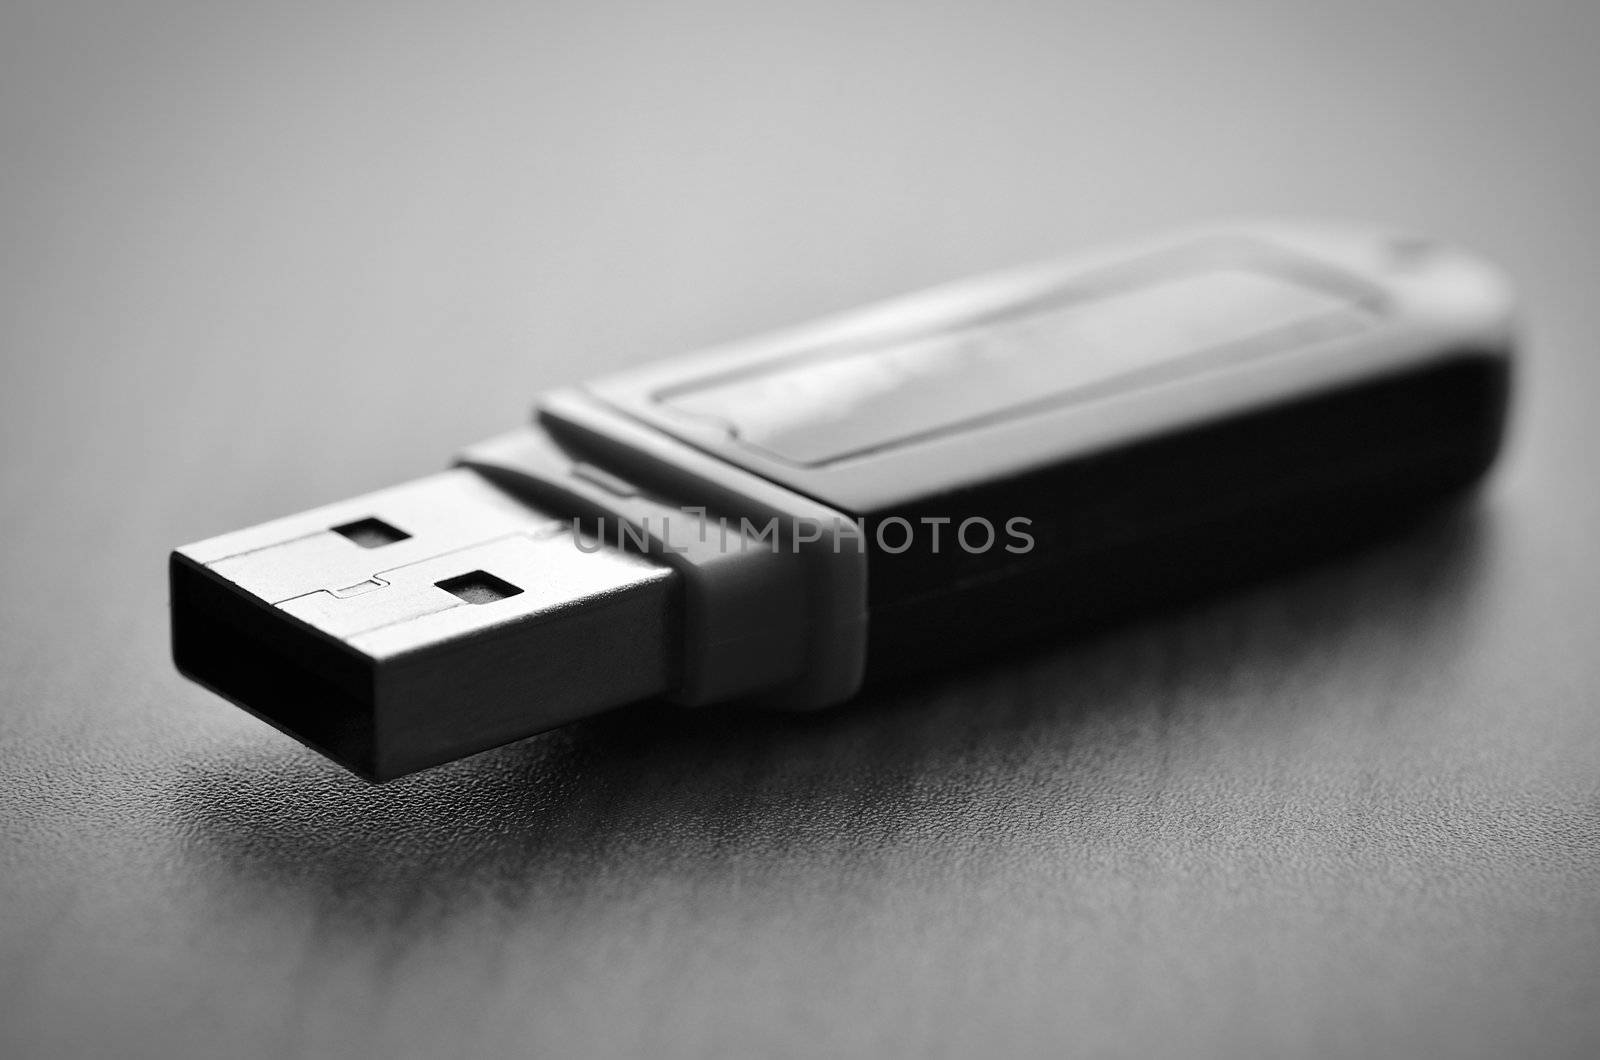 Pendrive close up by silent47